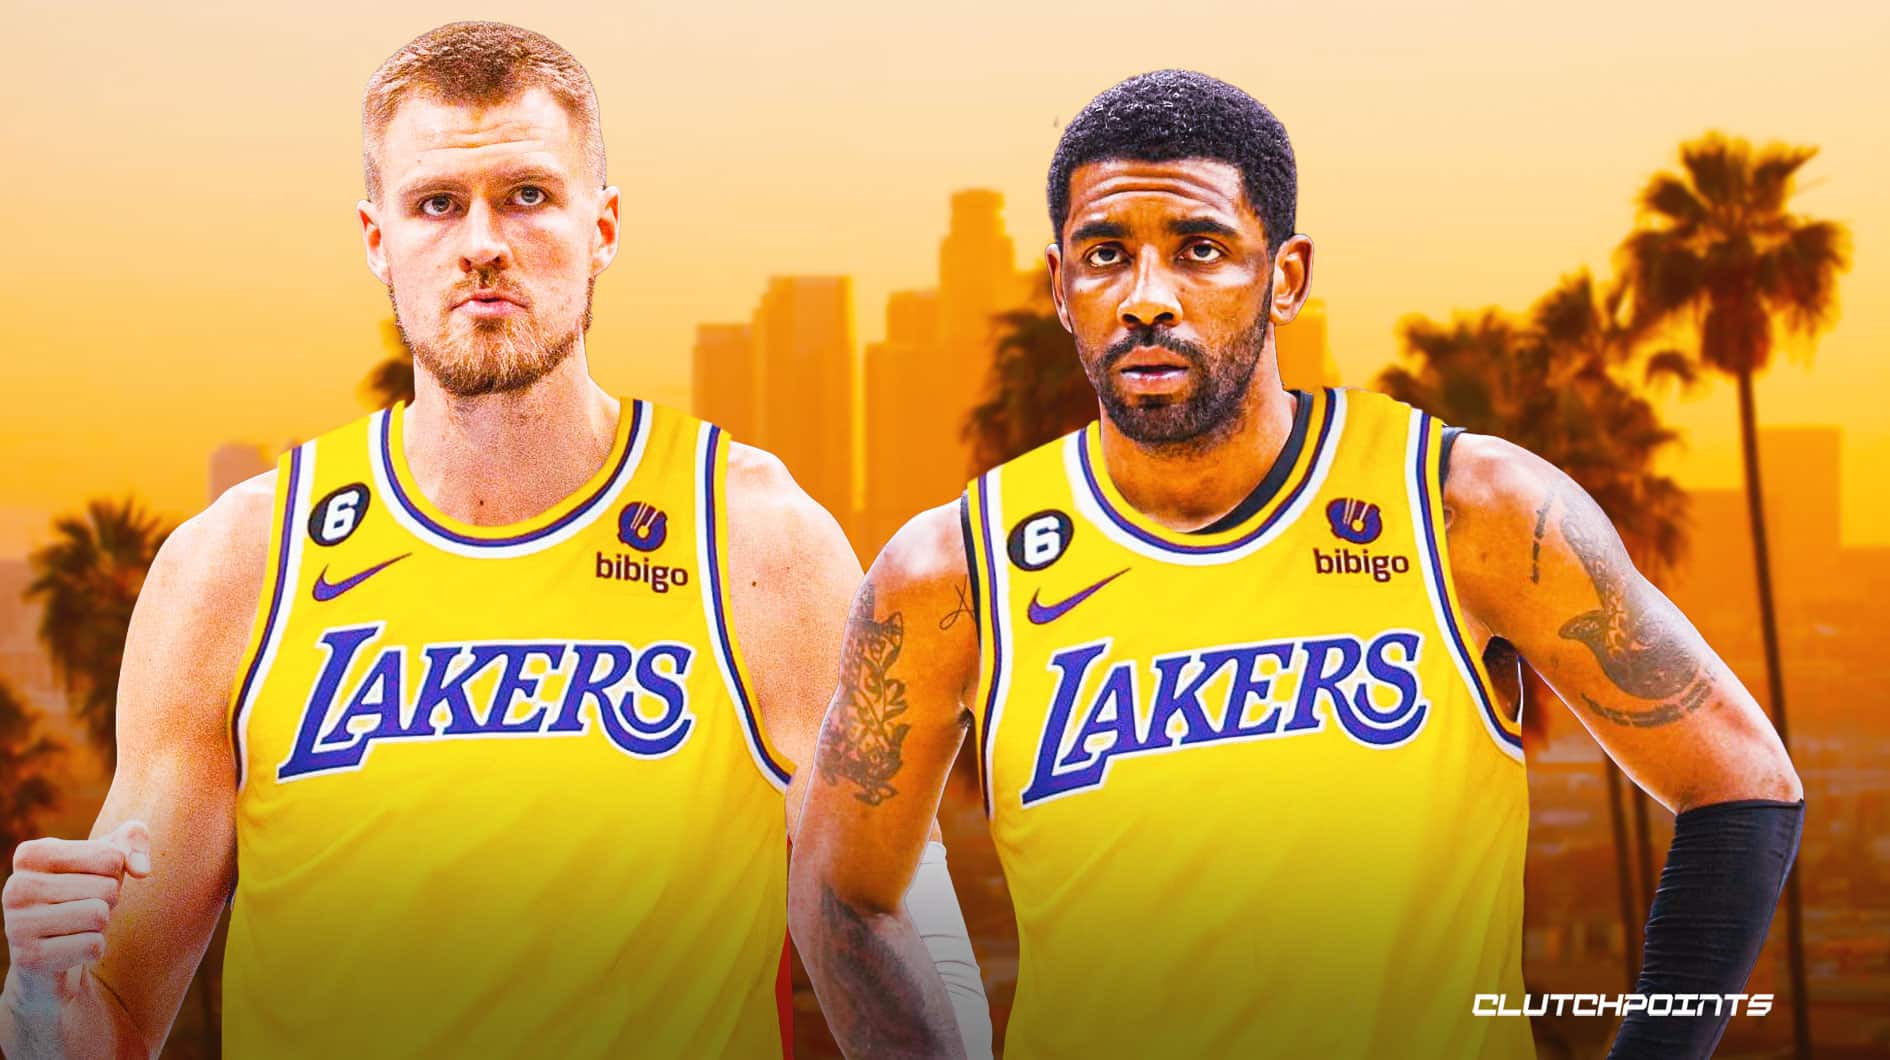 Lakers clearly stealing from Raptors with leaked jersey design